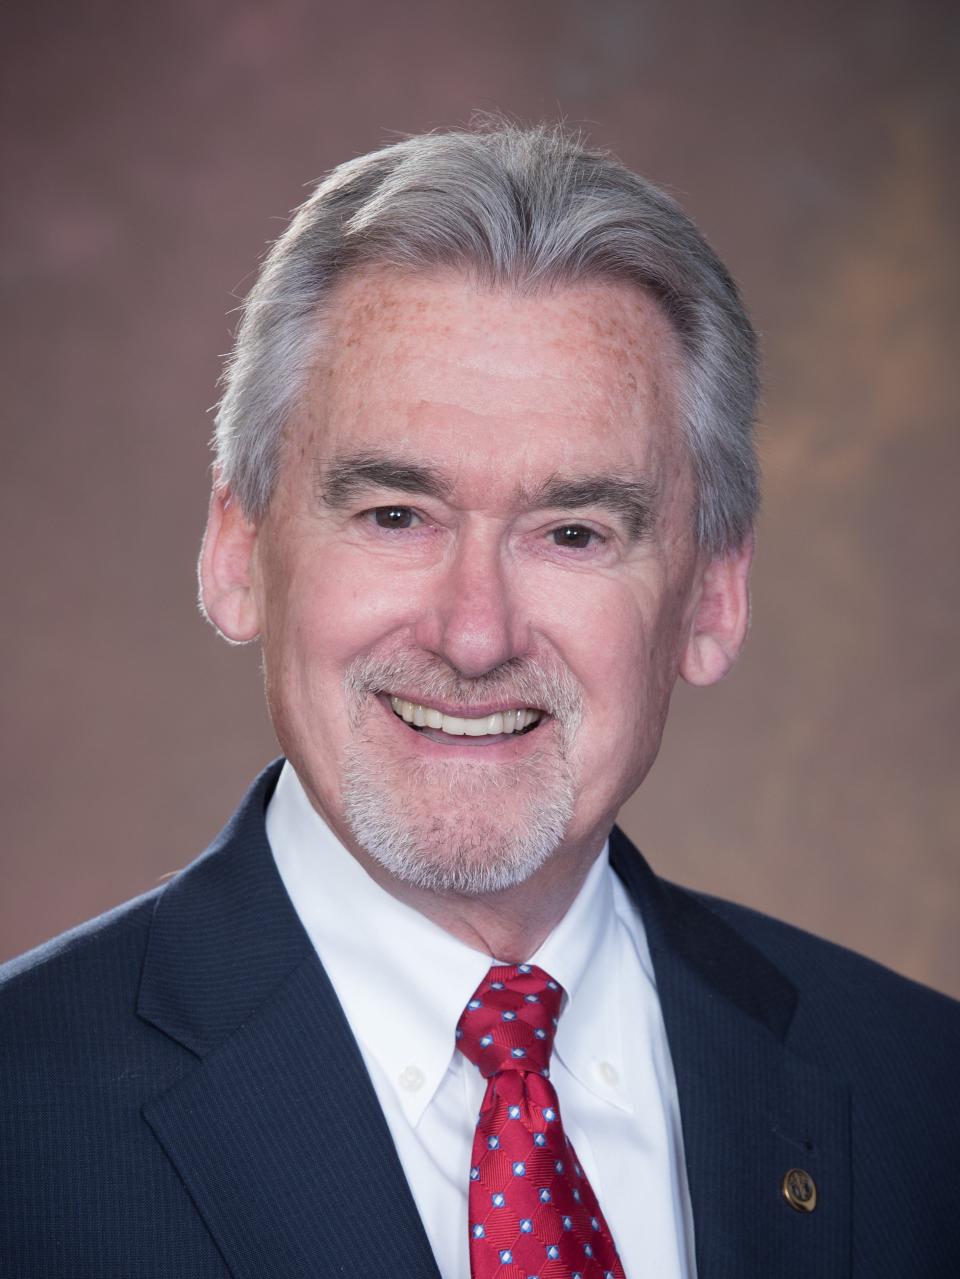 Mark Meadows, 2019 East Lansing City Council candidate (at-large, incumbent)